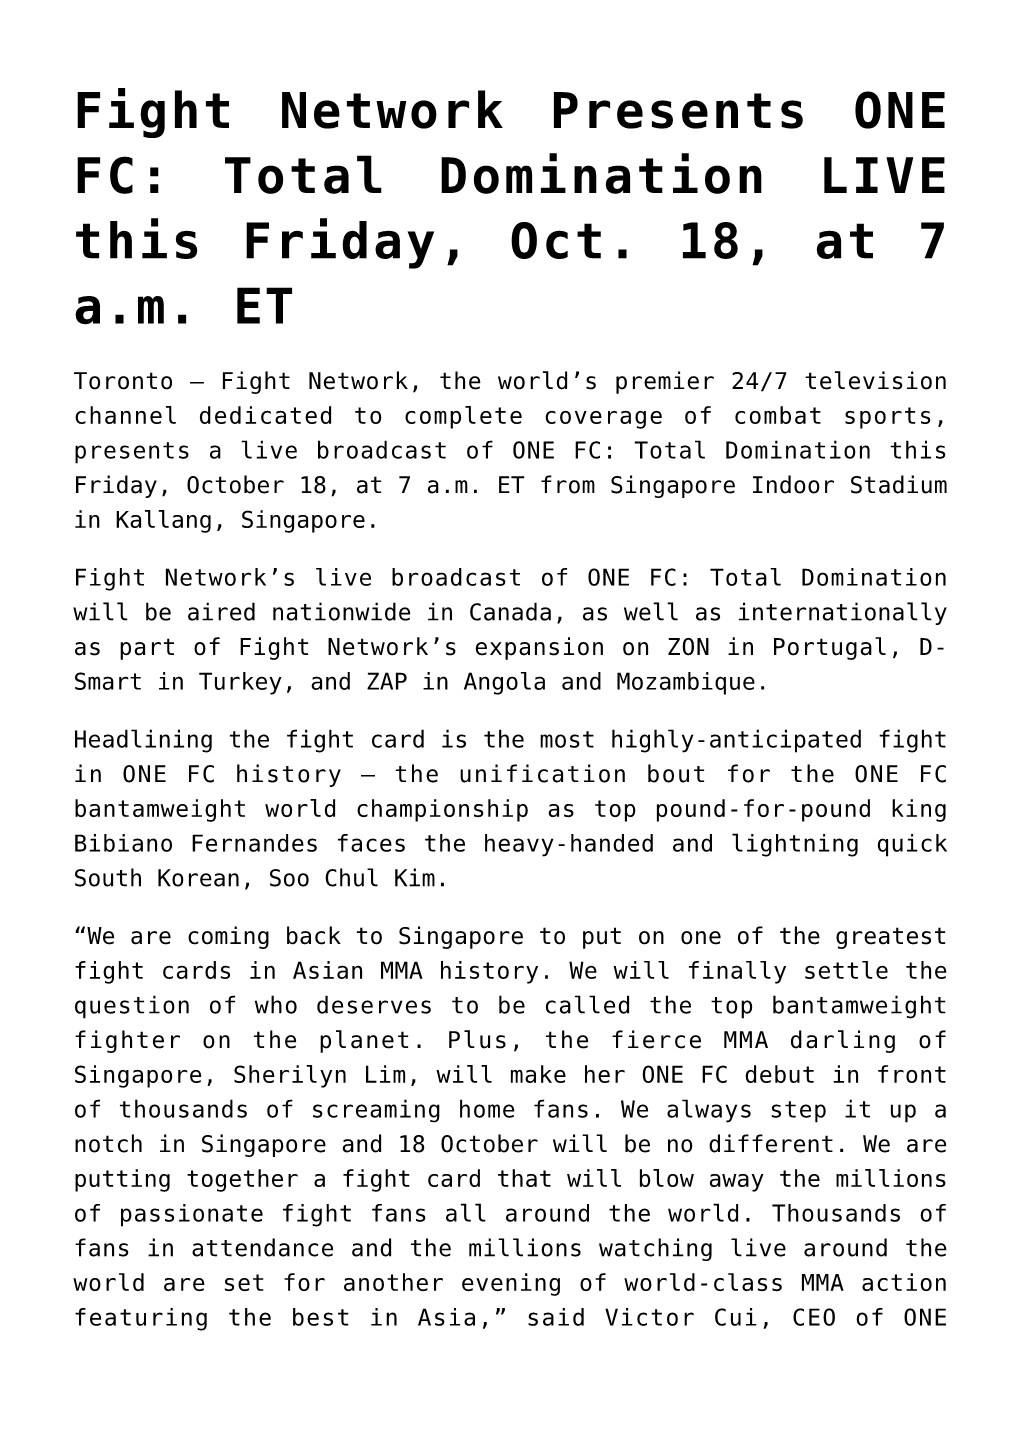 Fight Network Presents ONE FC: Total Domination LIVE This Friday, Oct